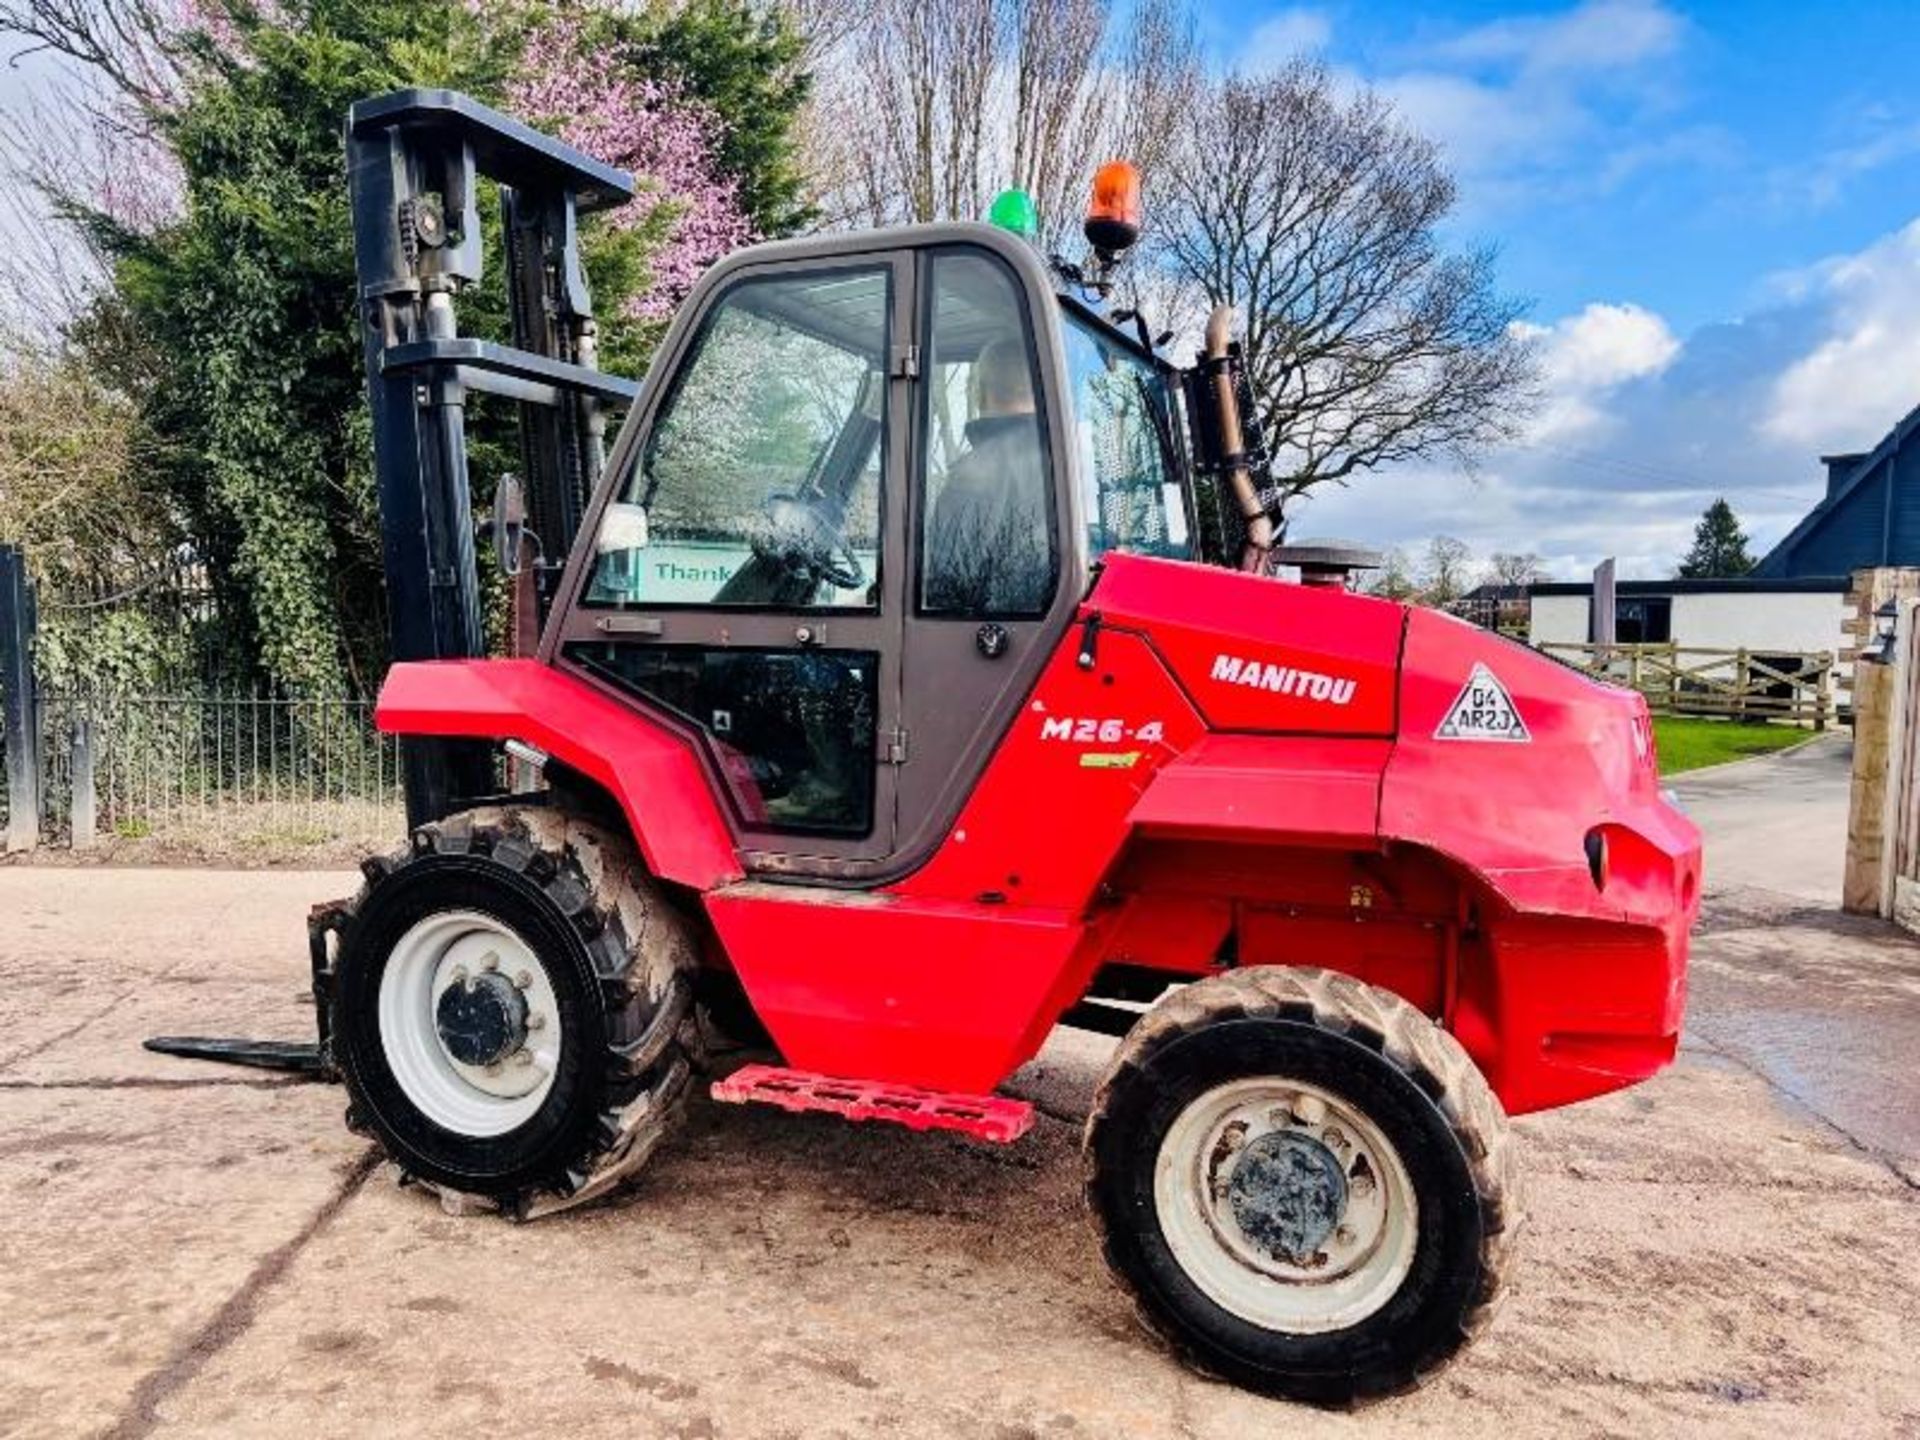 MANITOU M26-4 ROUGH TERRIAN 4WD FORKLIFT *YEAR 2017* C/W PALLET TINES - Image 9 of 16